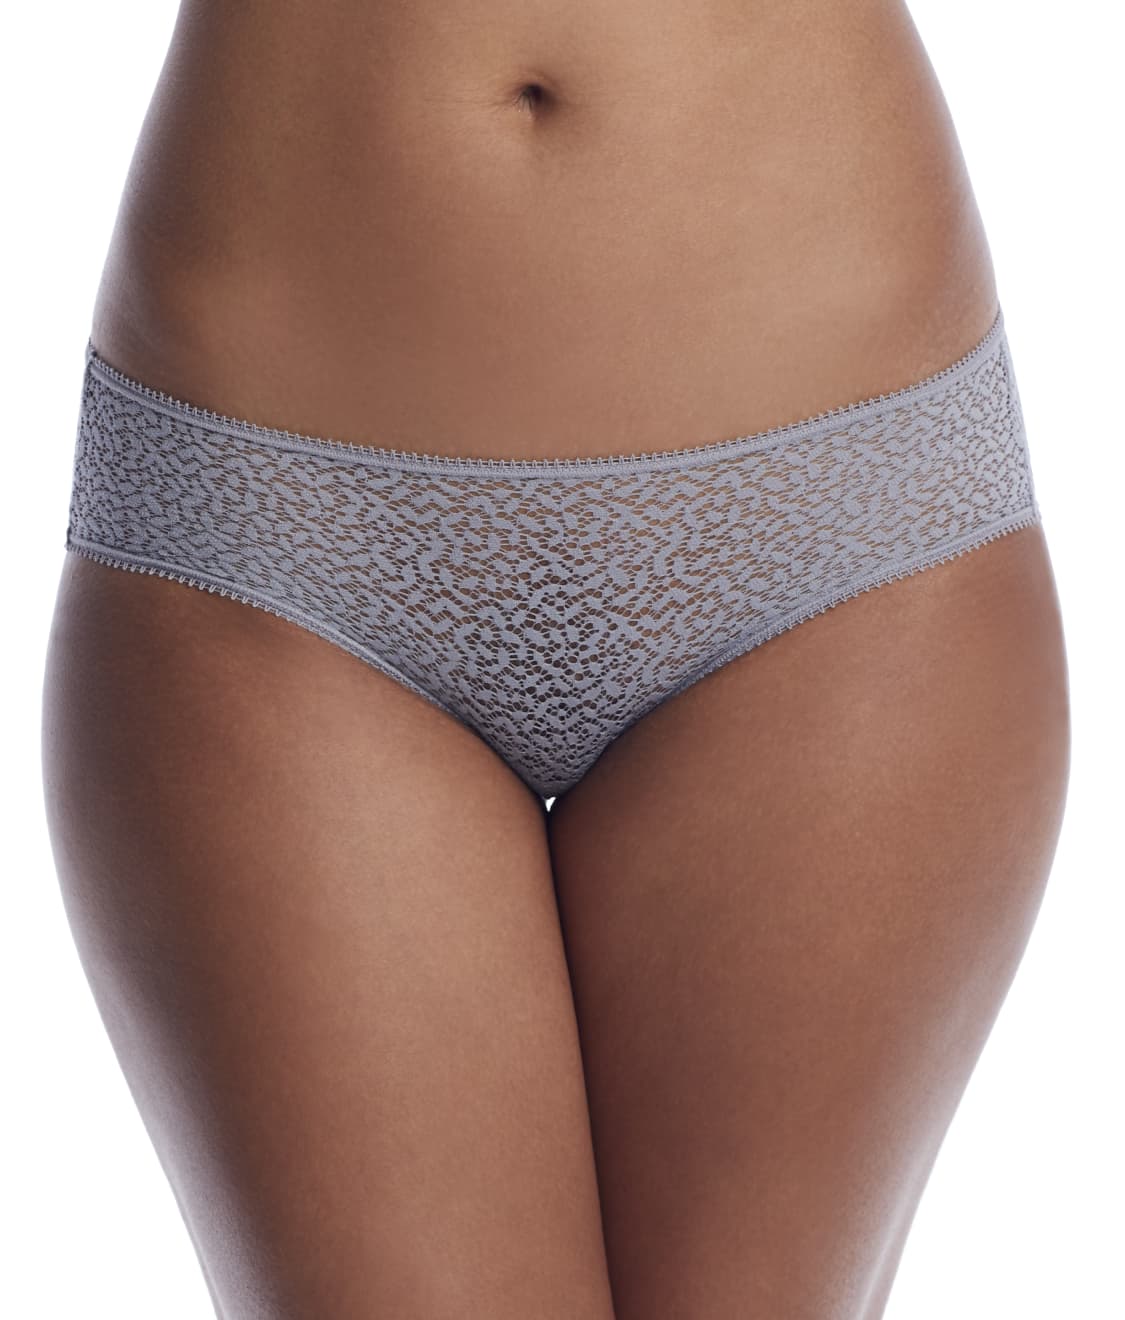 M XL  MSRP $13.00 NWT L Details about   DKNY Sheer Lace Hipster Panty DK5022   S